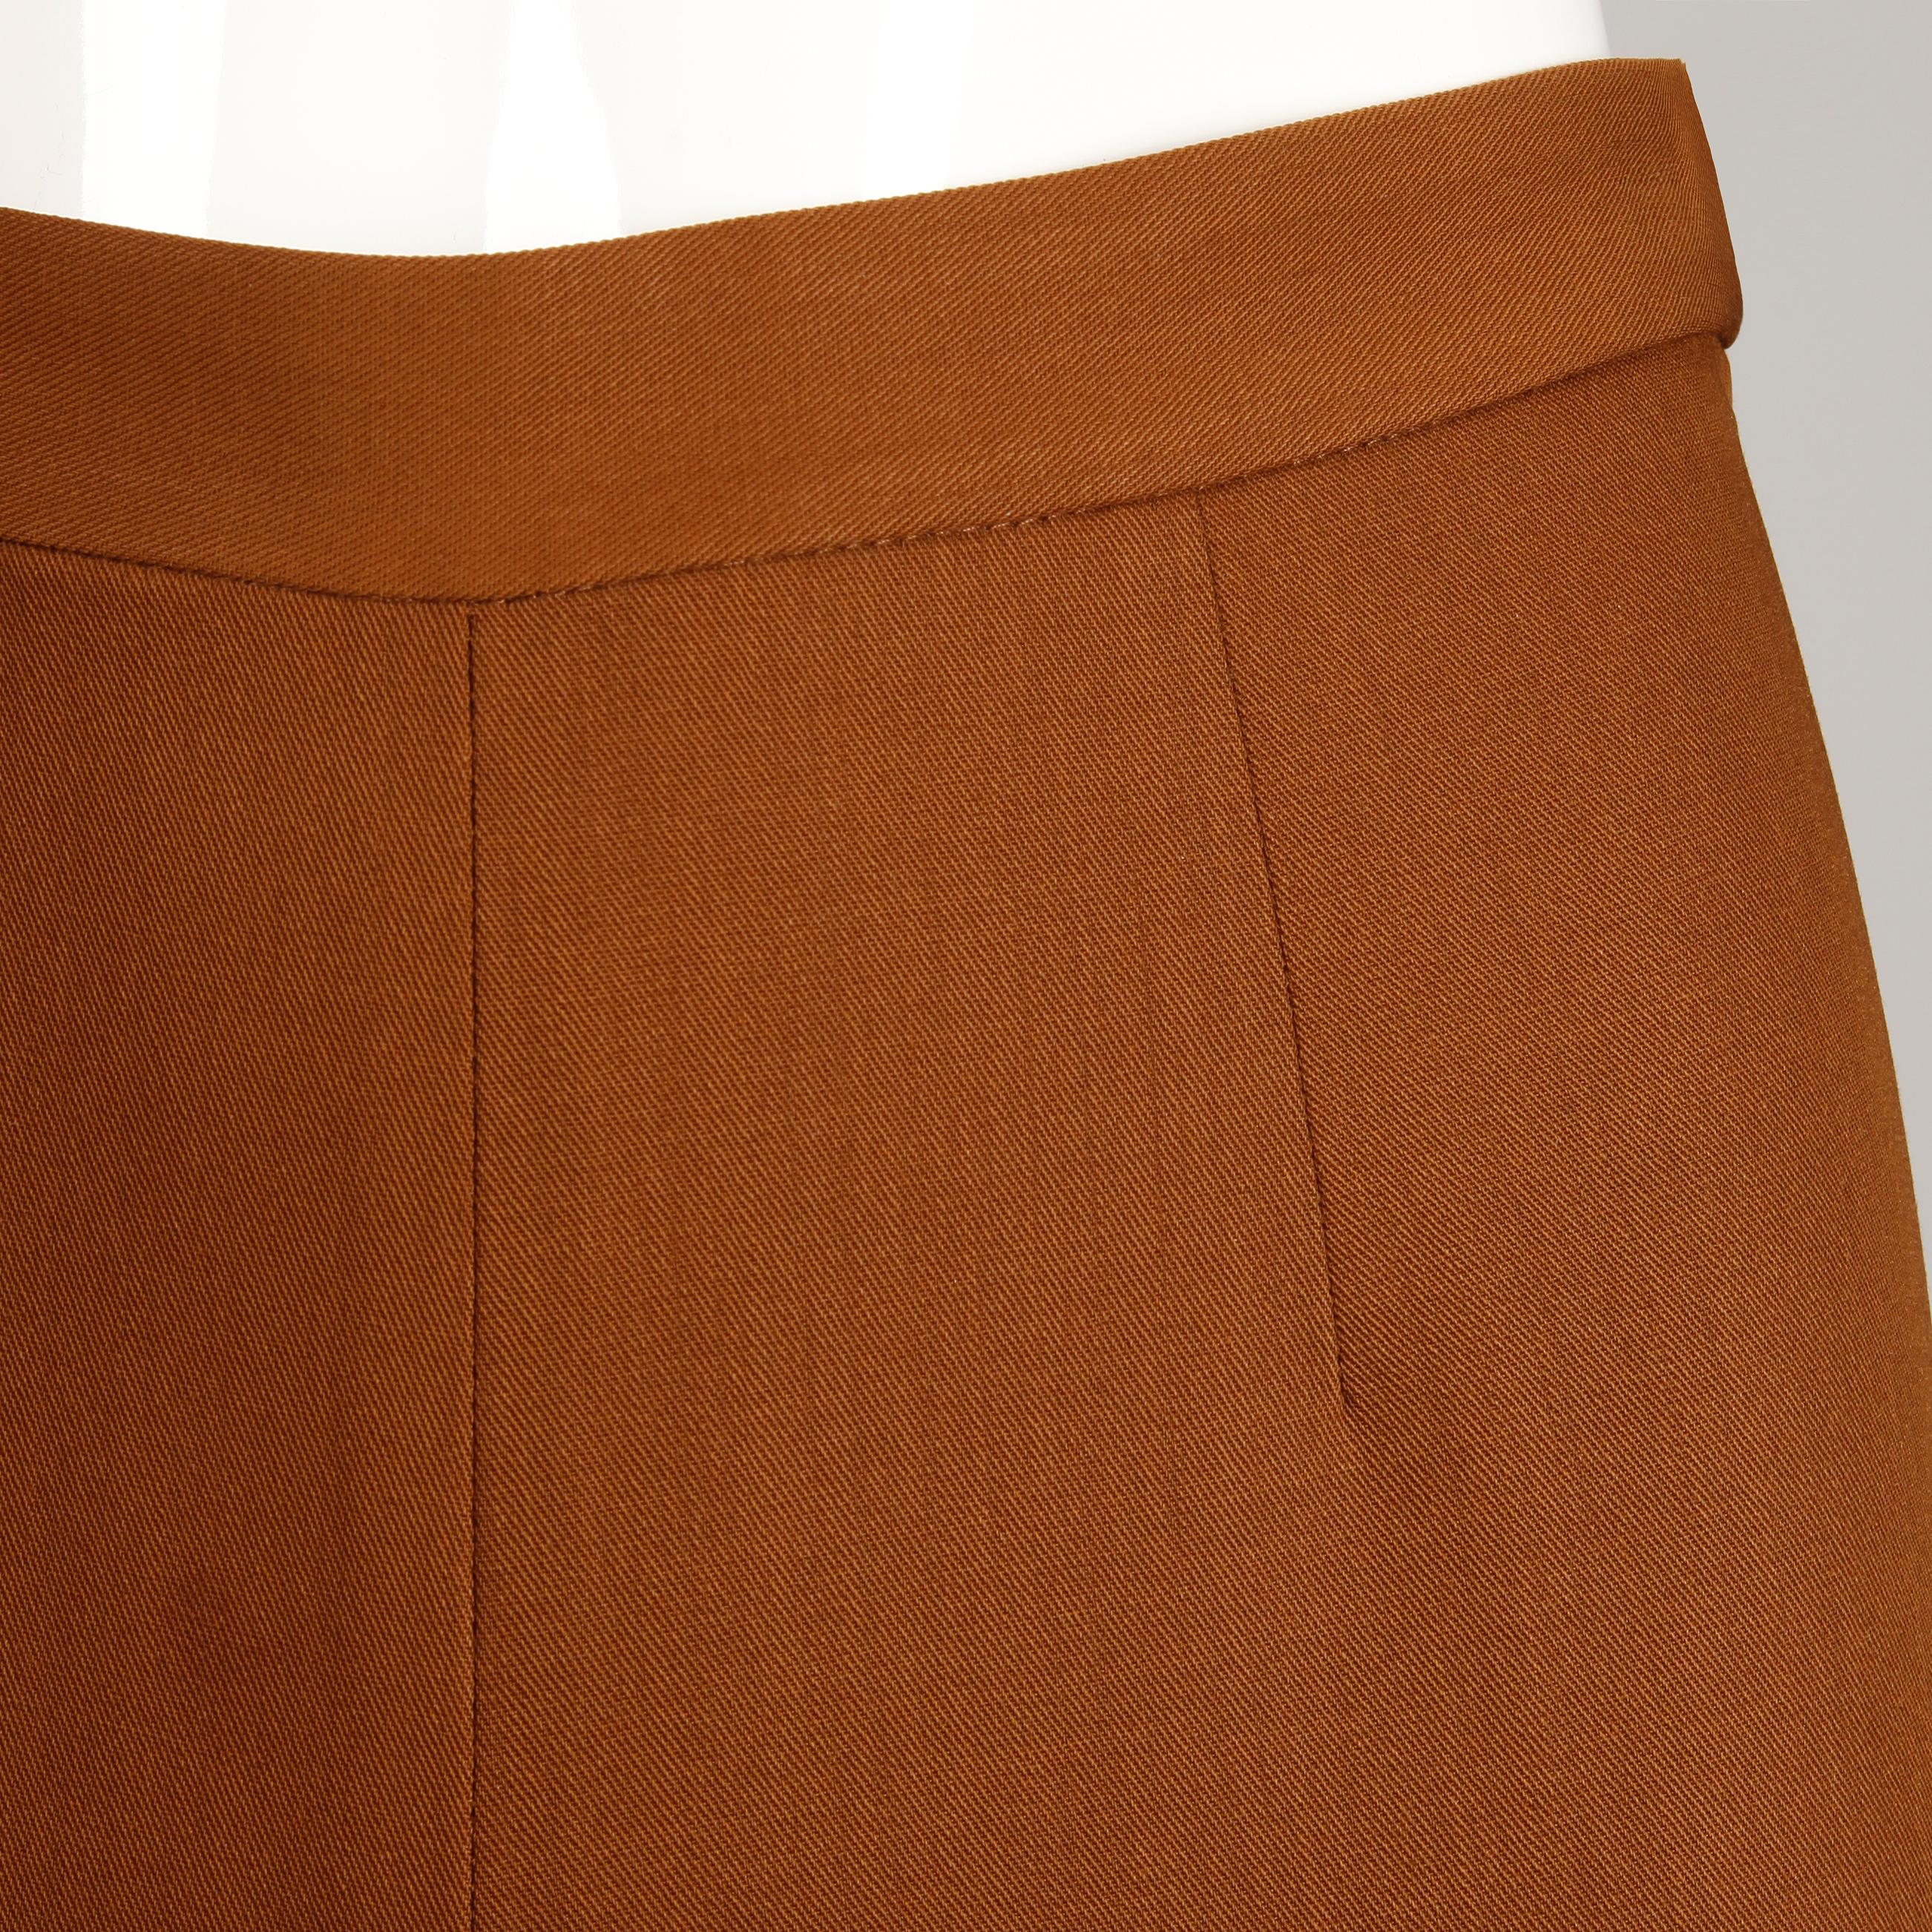 1990s Jean Paul Gaultier Femme Vintage Caramel Brown Wool Pants or Trousers In Excellent Condition For Sale In Sparks, NV